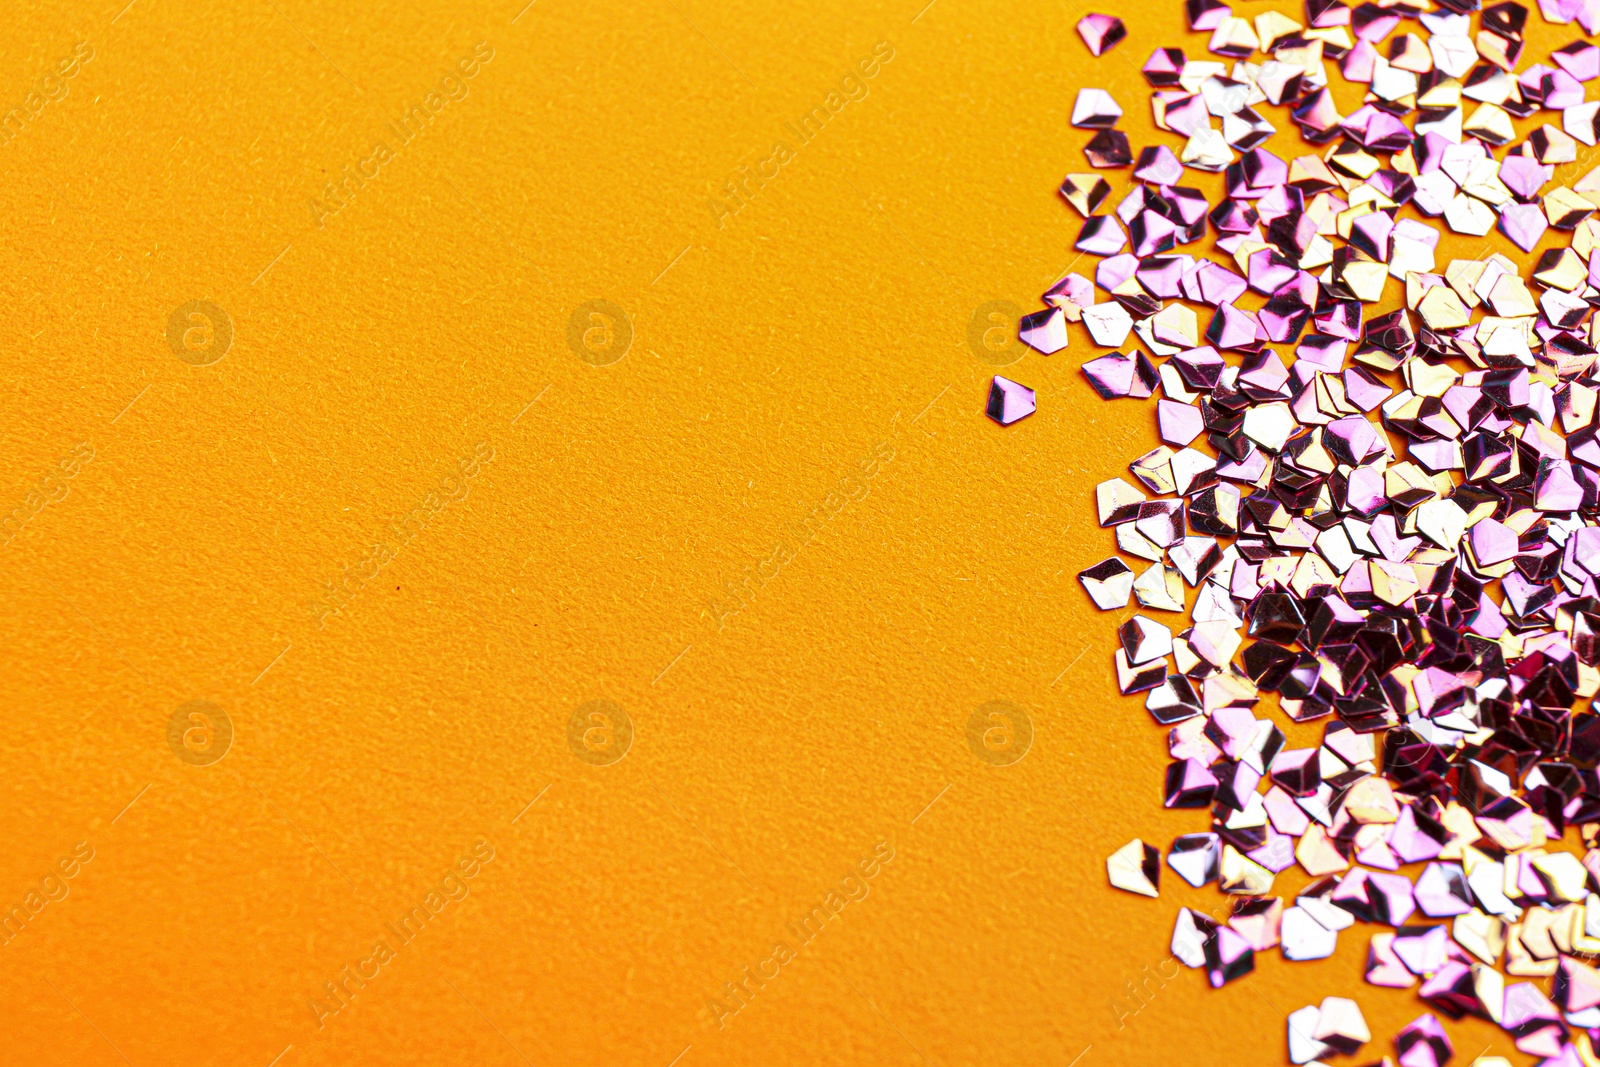 Photo of Shiny bright violet glitter on yellow background. Space for text